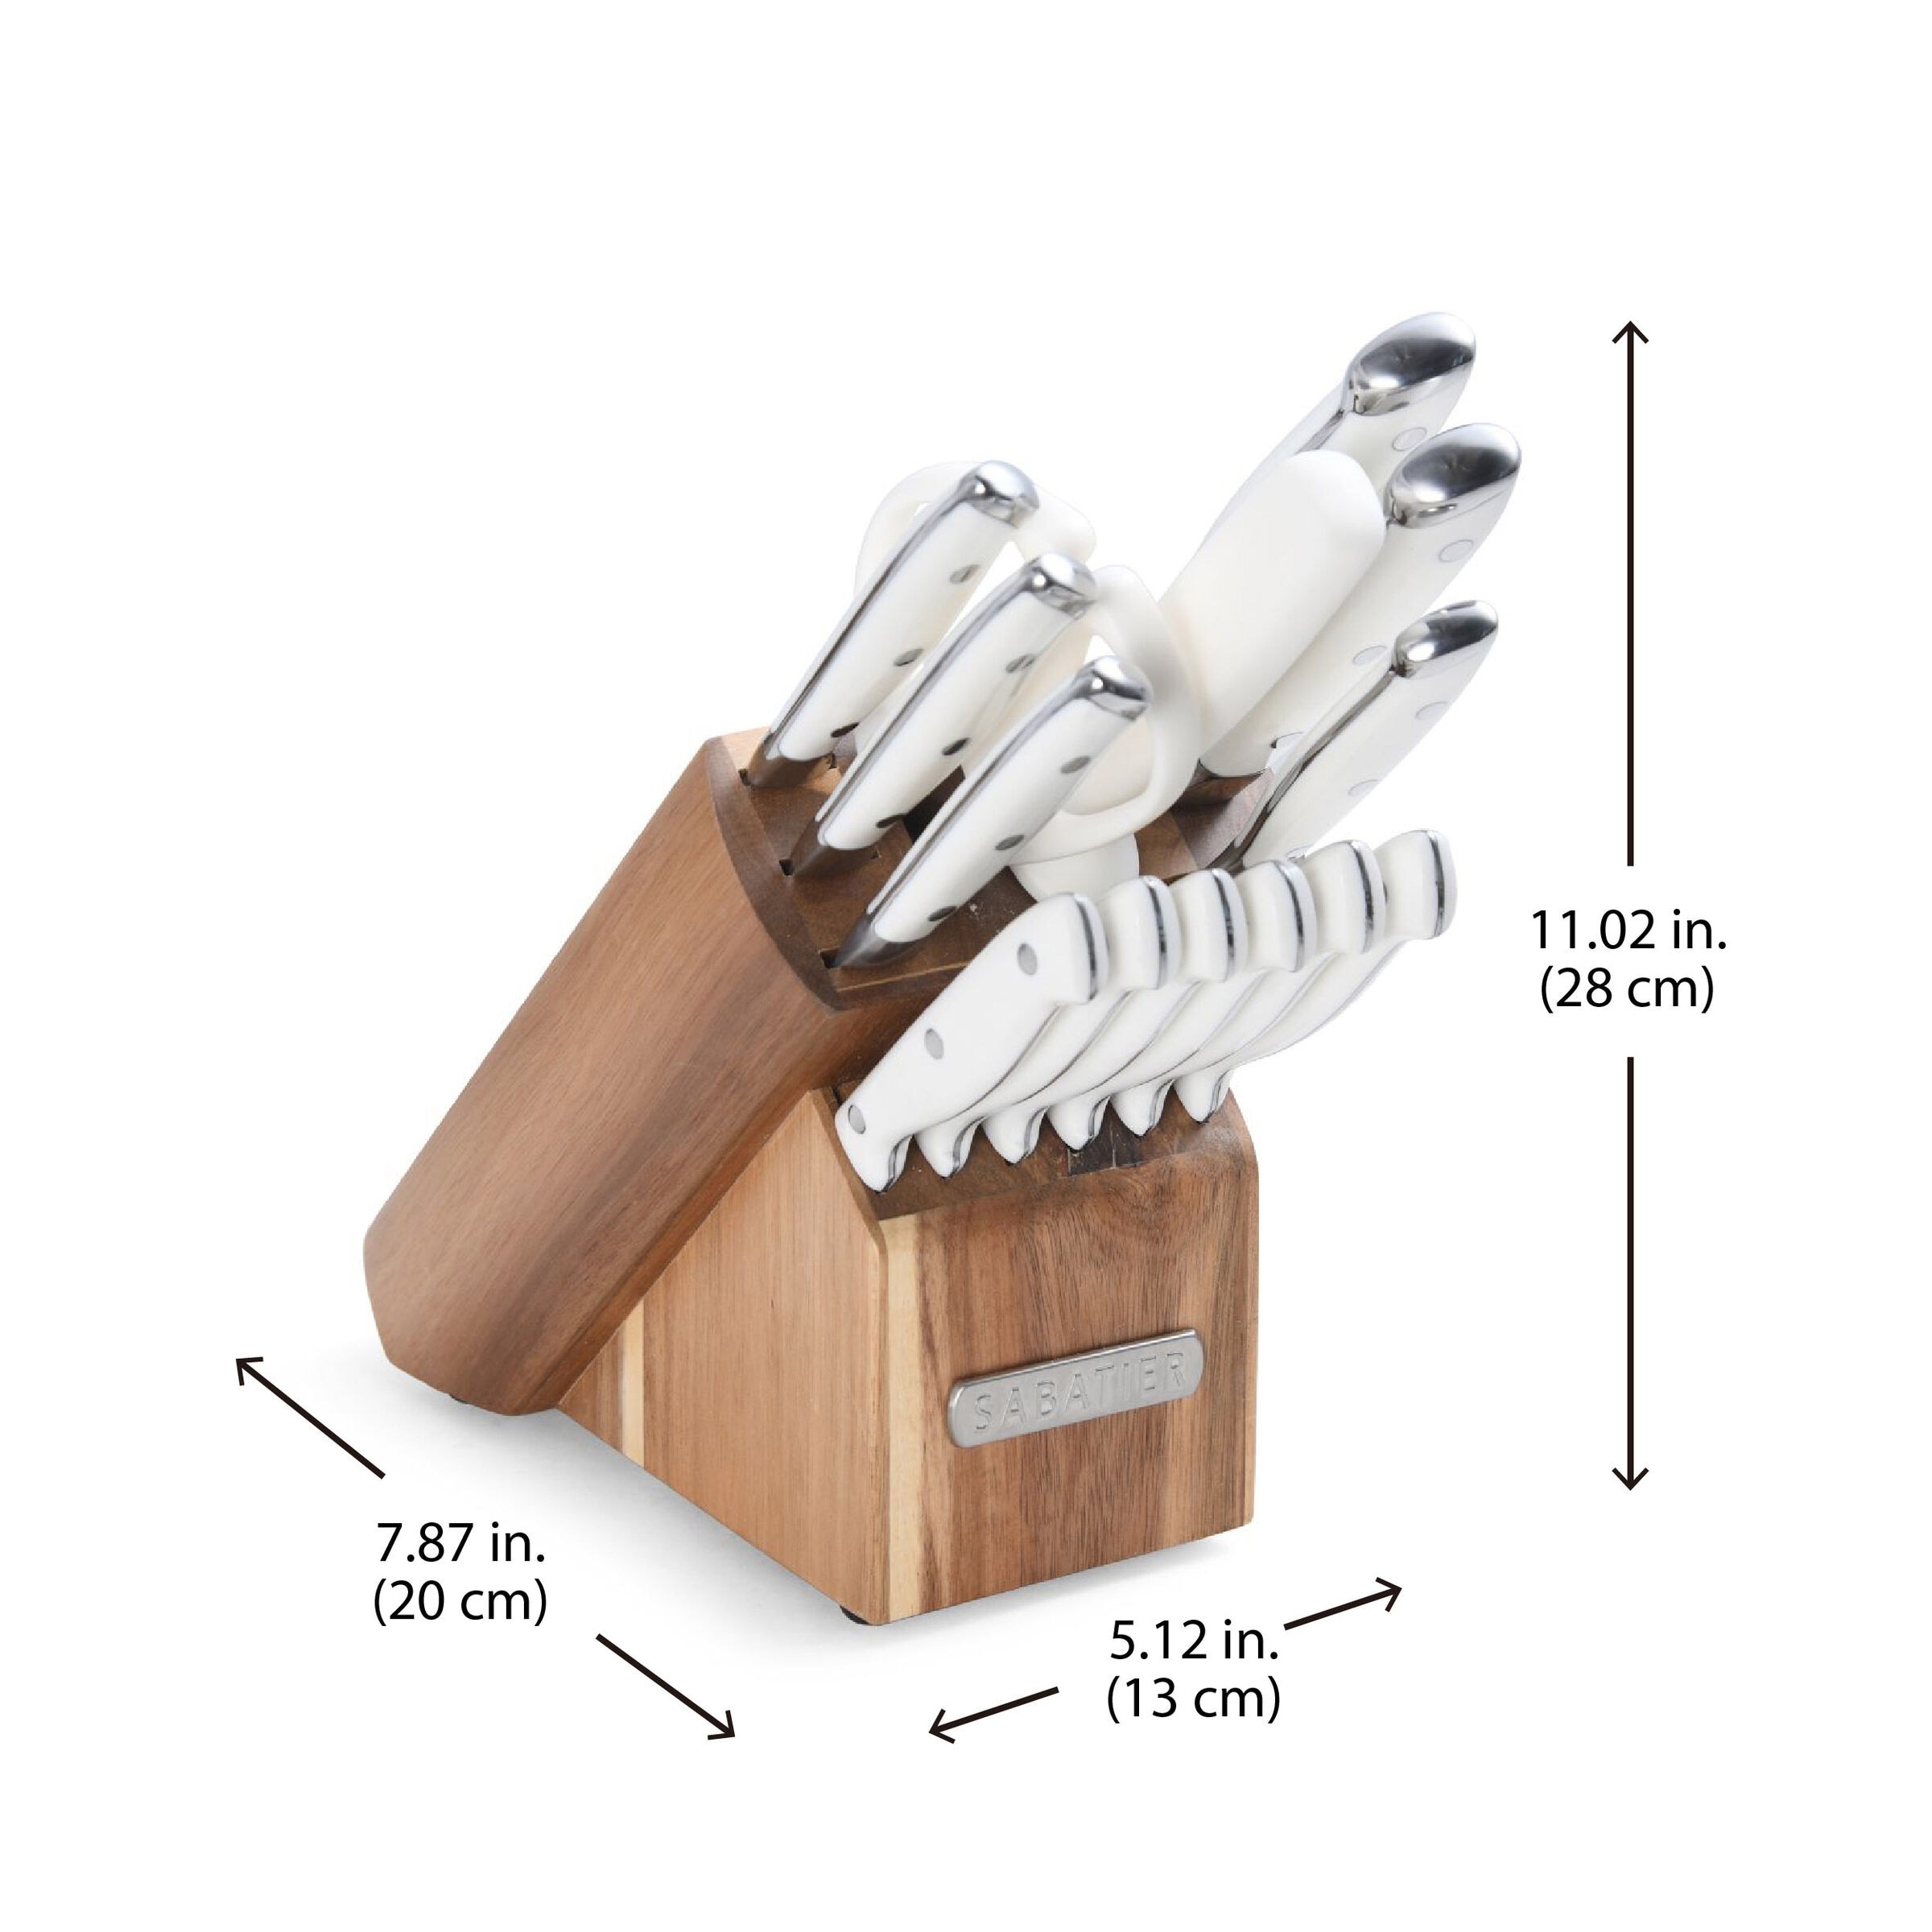 https://ak1.ostkcdn.com/images/products/is/images/direct/5af691b6a2e5cfd1193efa170054667d4709fdc2/Sabatier-15-Piece-White-Forged-Triple-Rivet-Cutlery-Set-with-Acacia-Block.jpg